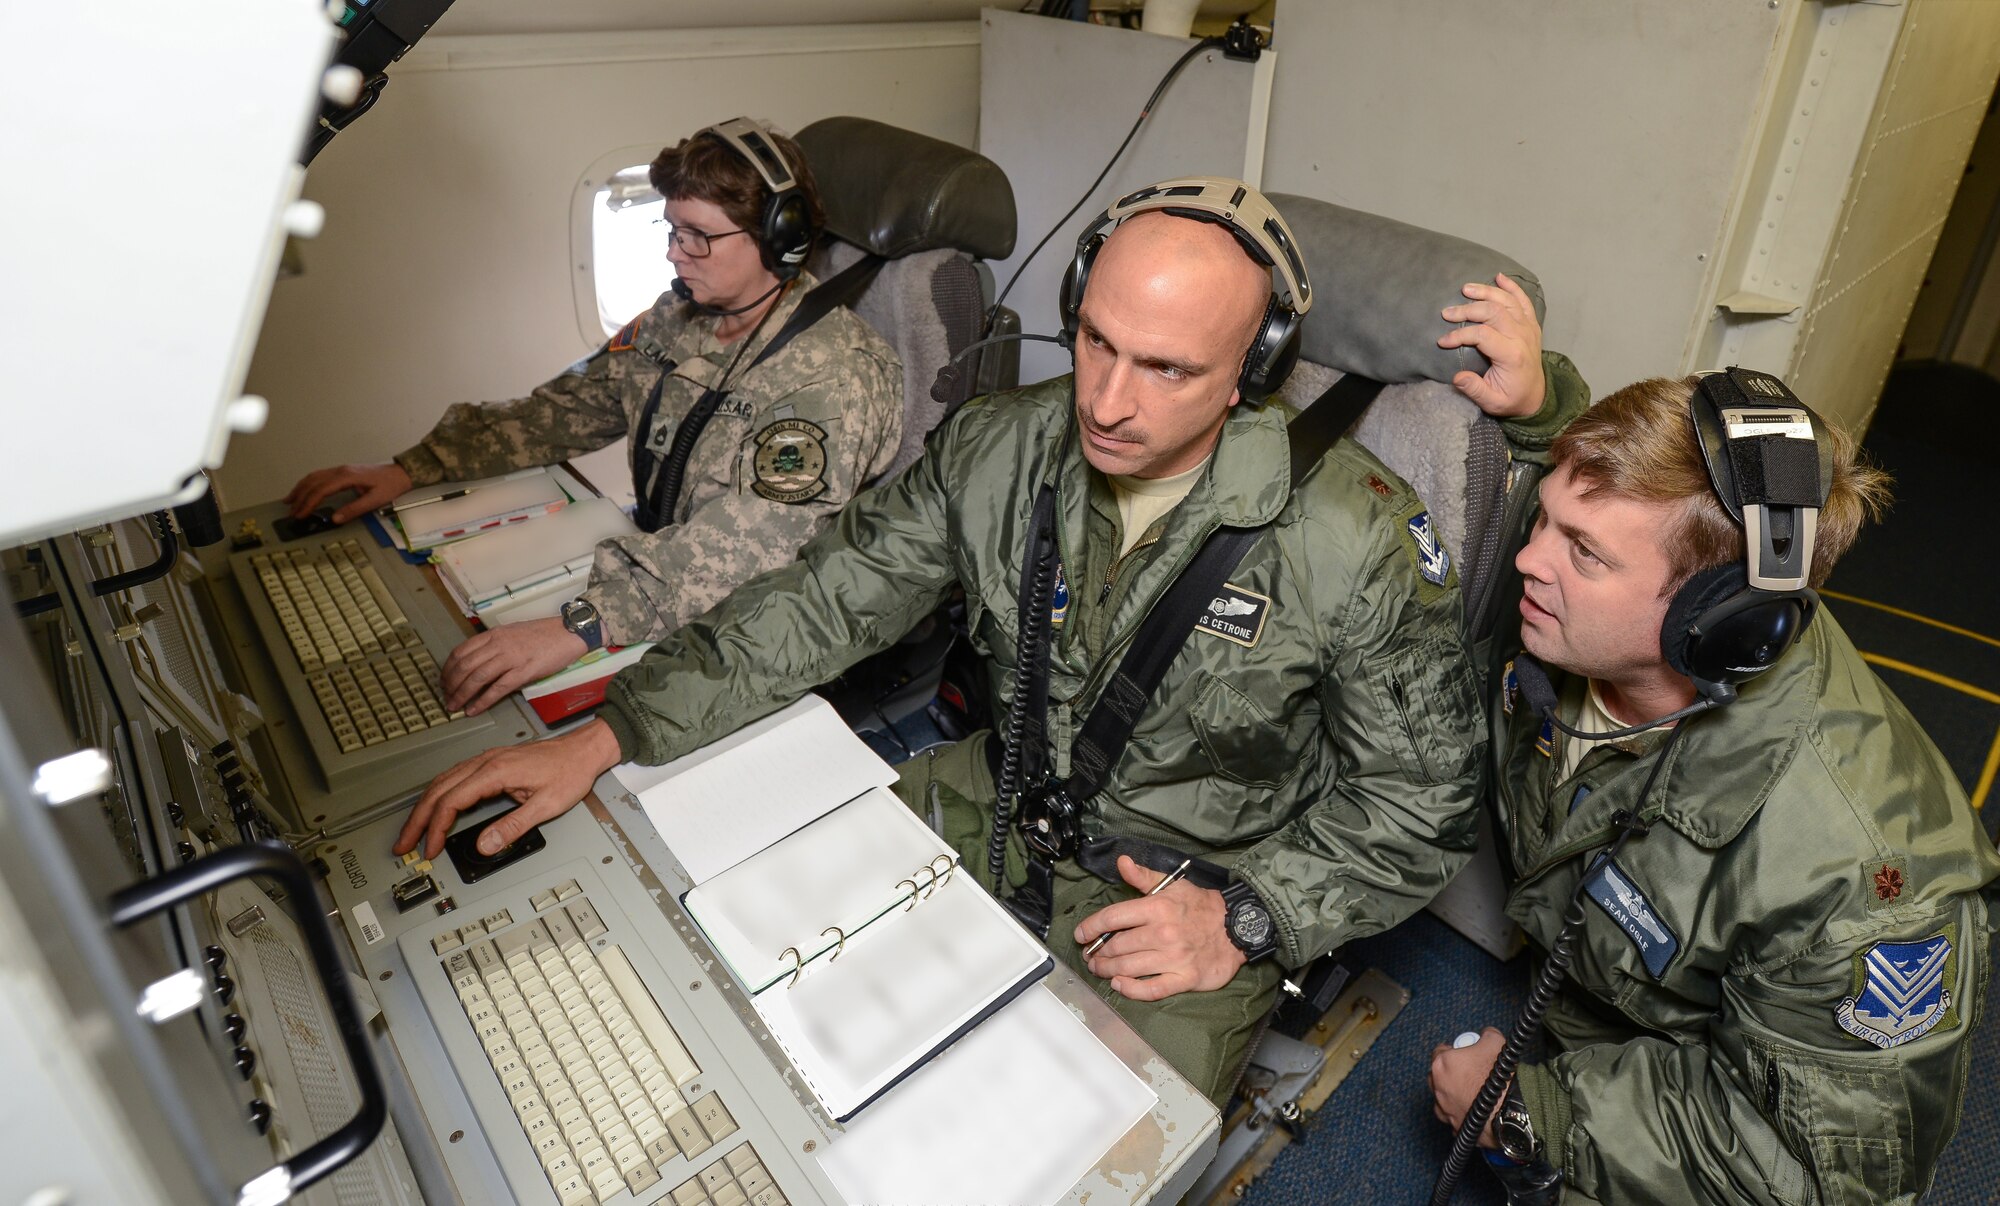 U.S. Air Force aircrew members with the 116th Air Control Wing, Georgia Air National Guard, and a Soldier with the 138th Military Intelligence Company, monitor surveillance information during a mission aboard an E-8C Joint STARS (JSTARS), Robins Air Force Base, Ga., Nov. 15, 2014. The JSTARS platform provides wide-area, all-weather, surface surveillance radar that is used in a combat capacity supporting combatant commanders across the globe. They can also provide valuable data during domestic natural disasters; such as hurricanes and tornadoes, by communicating real-time geographic data to ground personnel to help safely evacuate citizens. (U.S. Air National Guard photo by Tech. Sgt. Regina Young/Released)(Portions of the photo have been blurred and names withheld for security purposes)